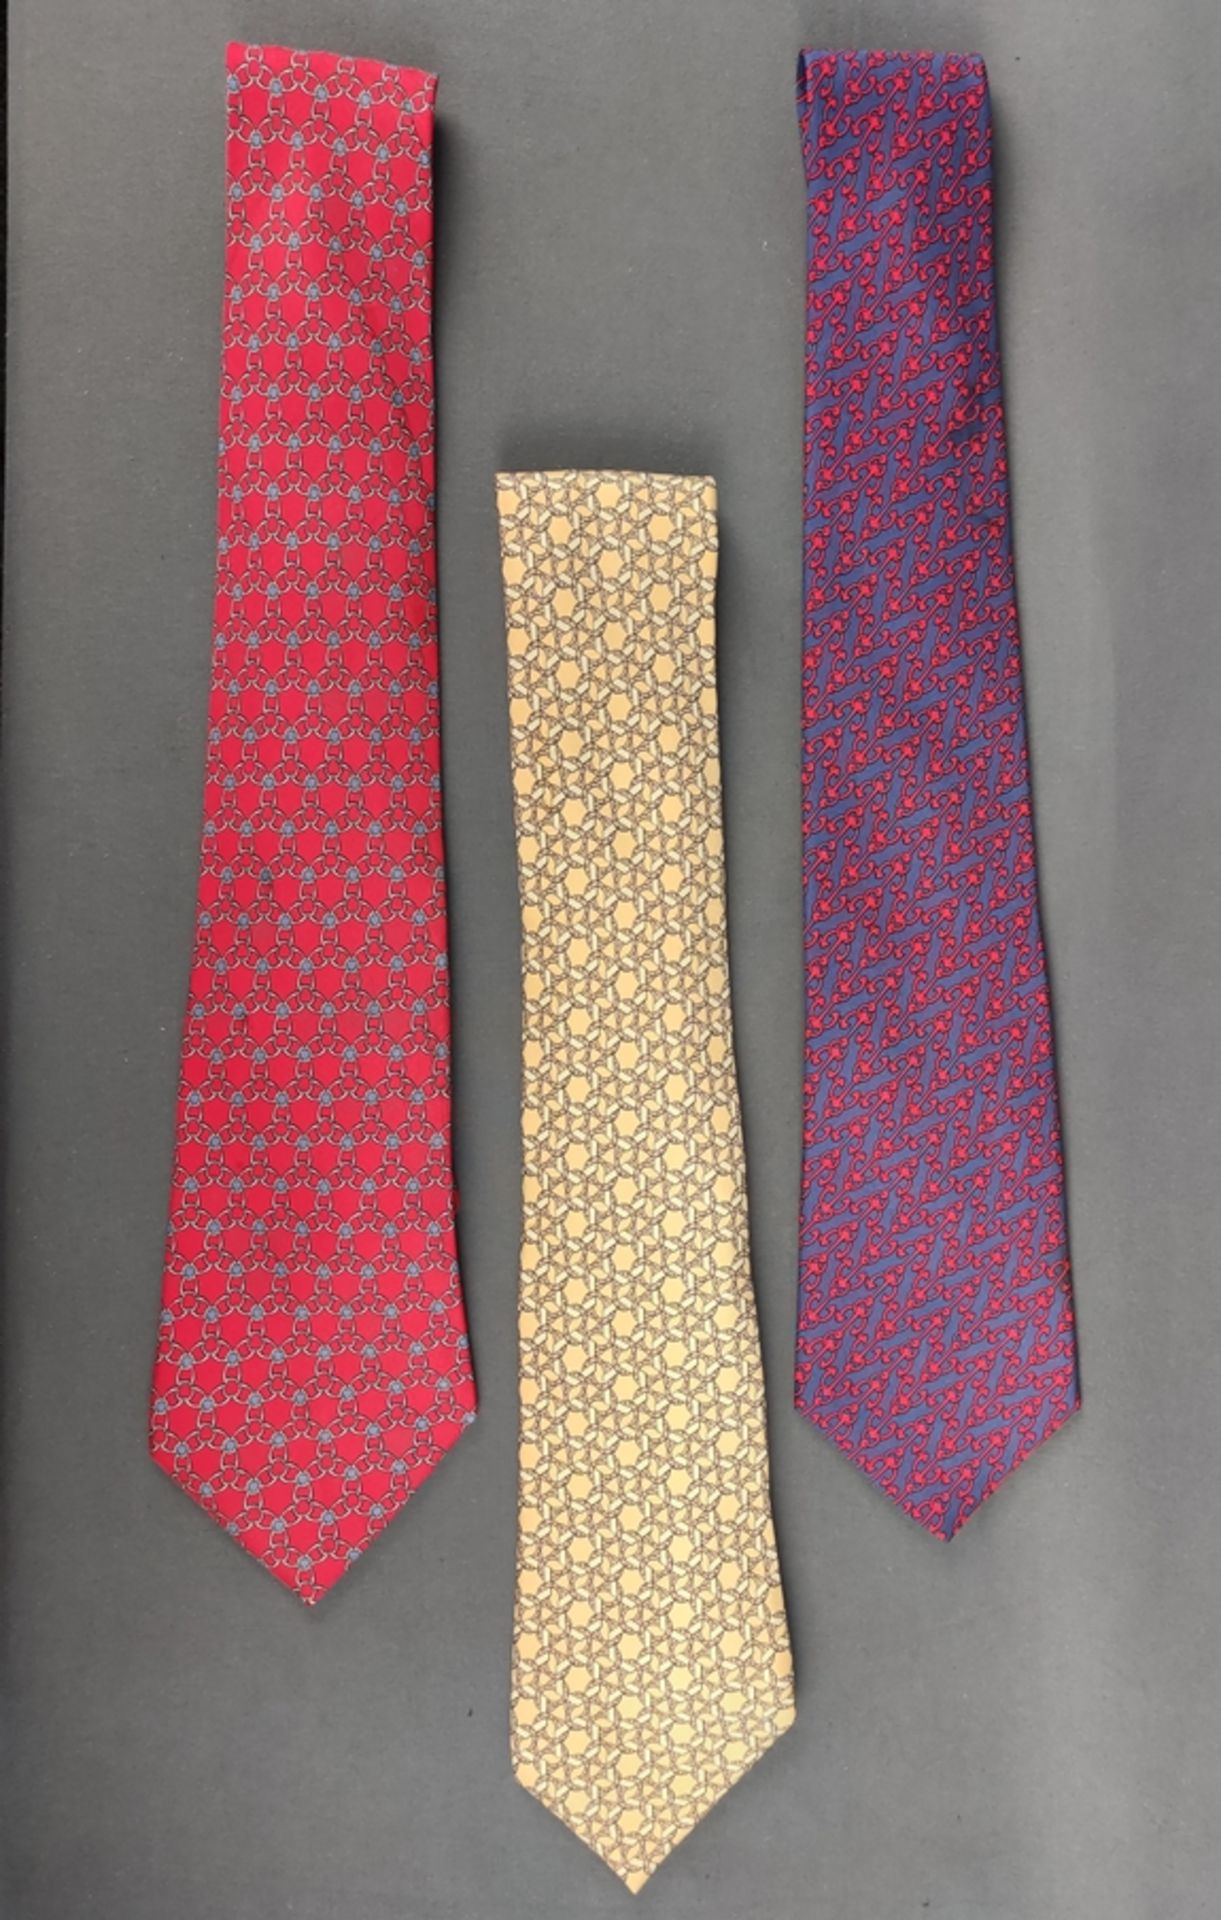 Collection of 3 vintage silk ties by HERMÈS, consisting of: Model 5339 TA, 5358 OA and Model 7935 M